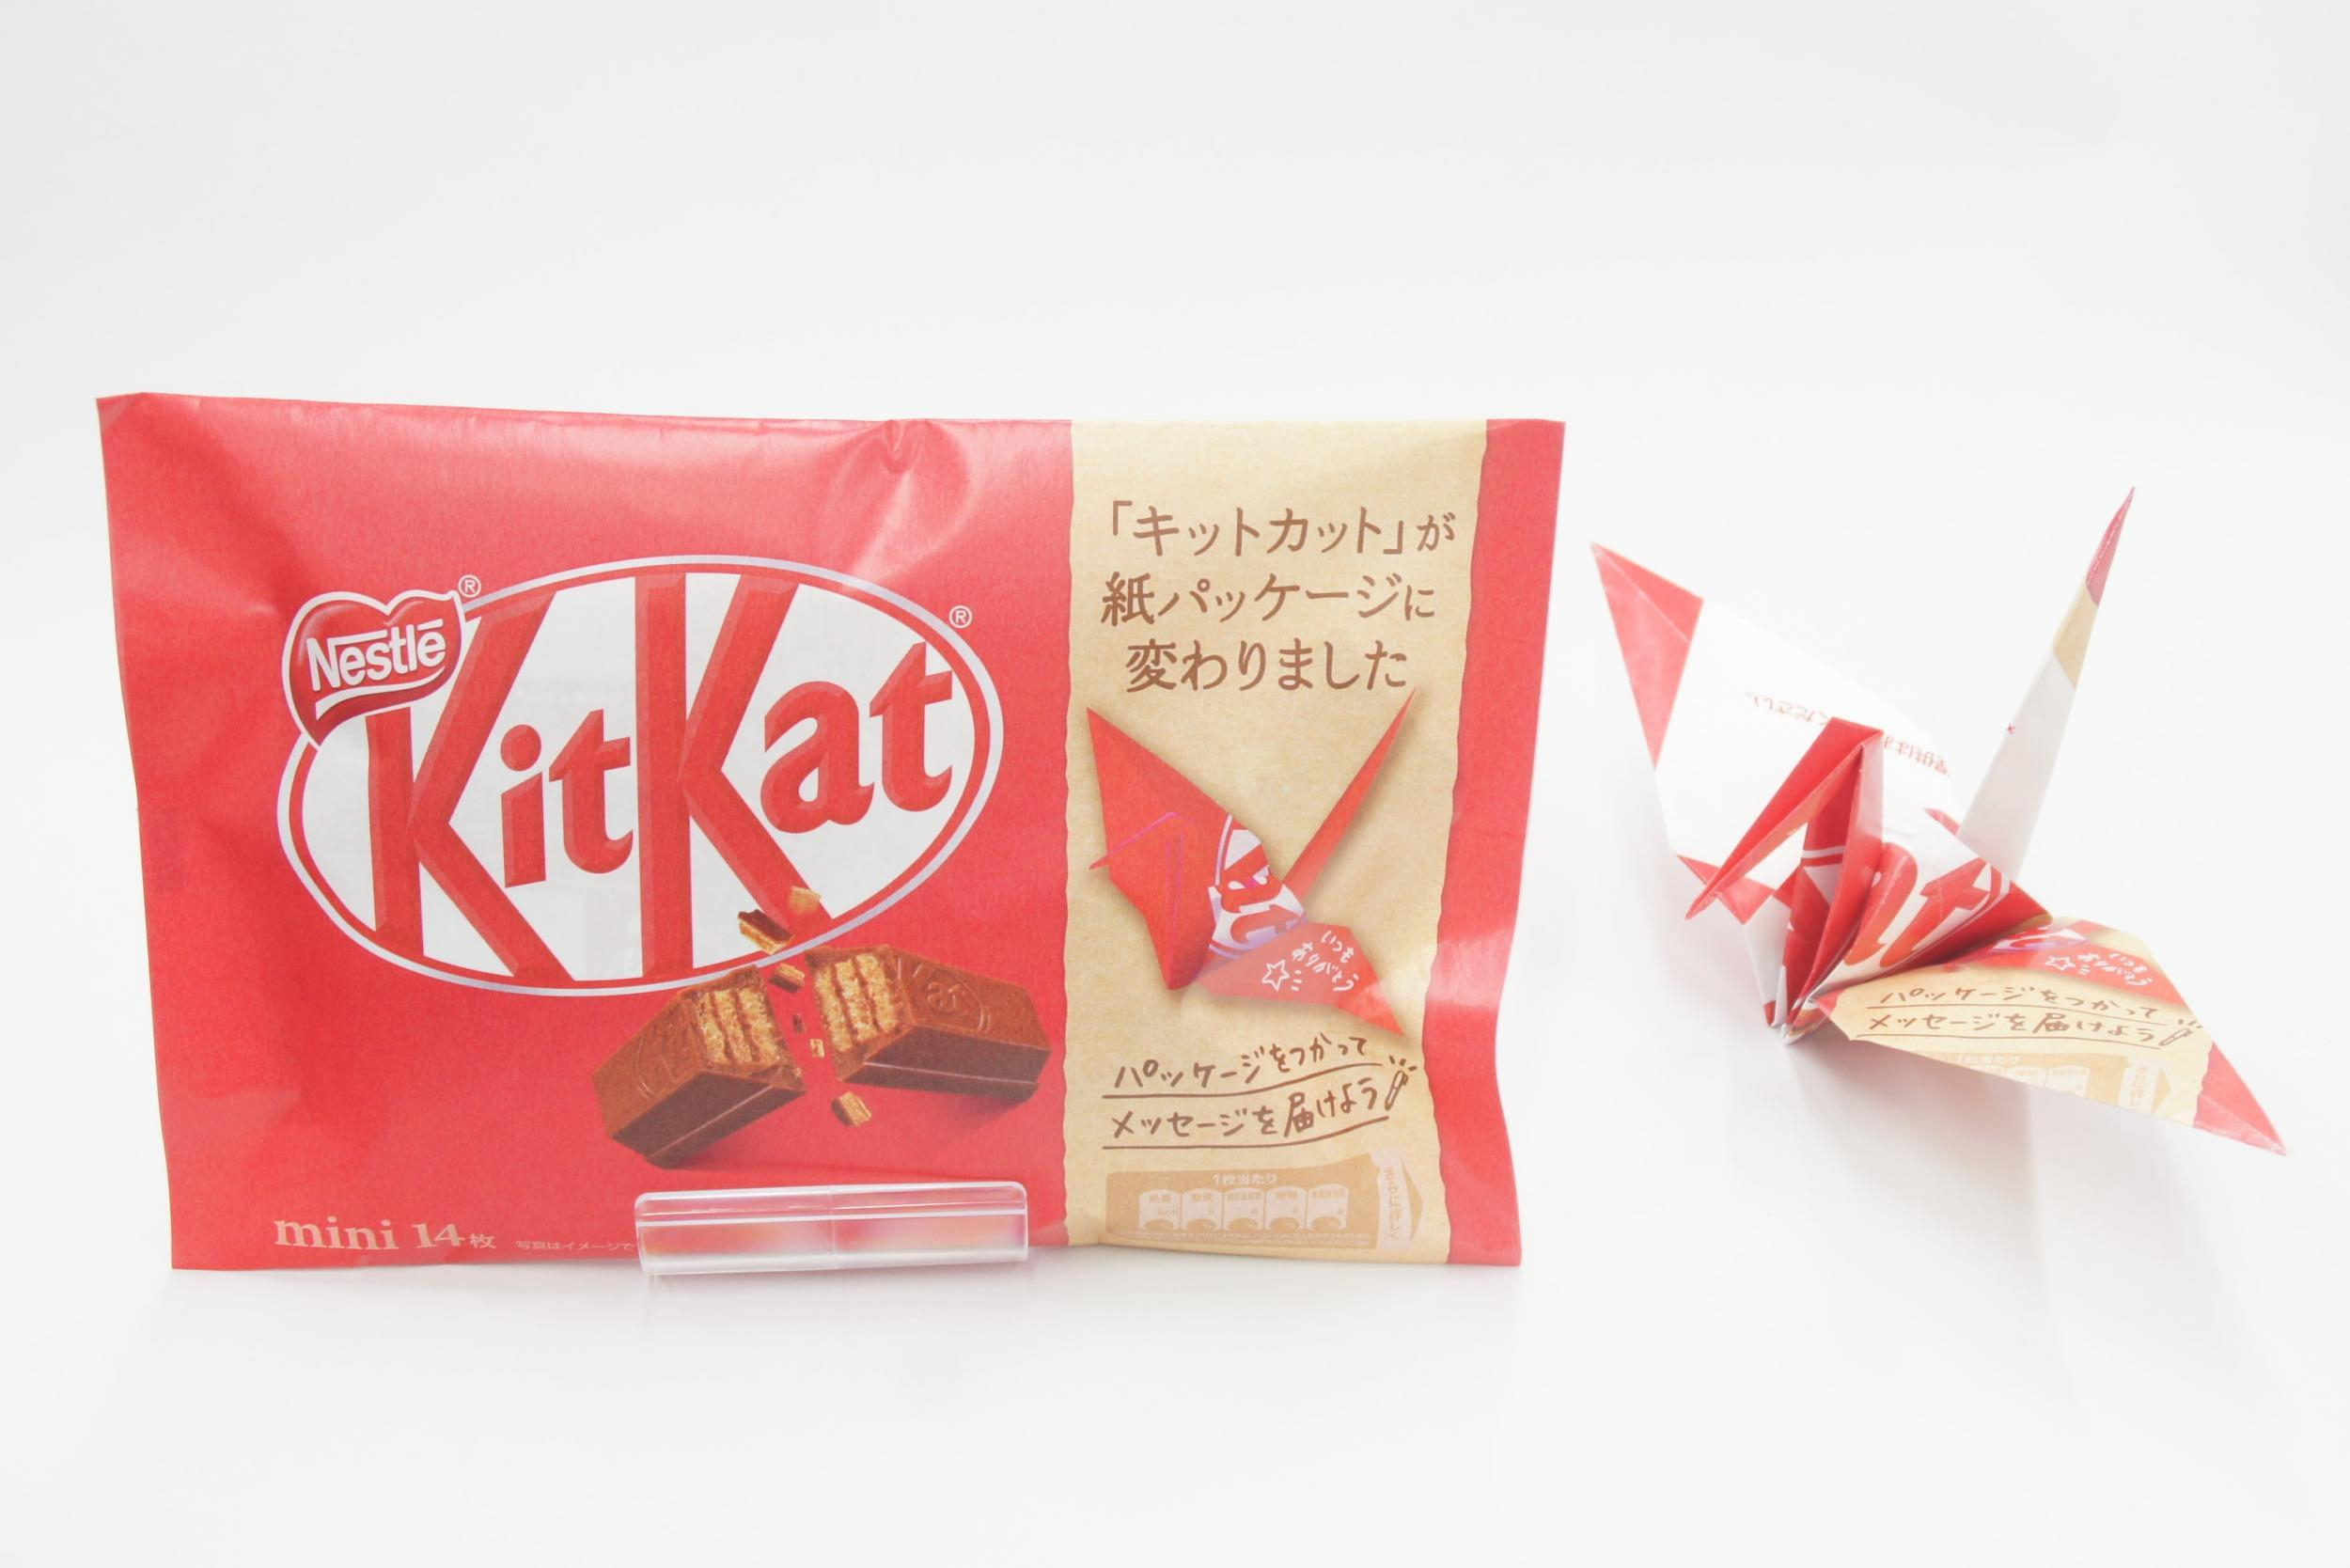 Origami Home Solutions Kitkat Japan To Use Paper Packaging That Can Be Folded Into Origami